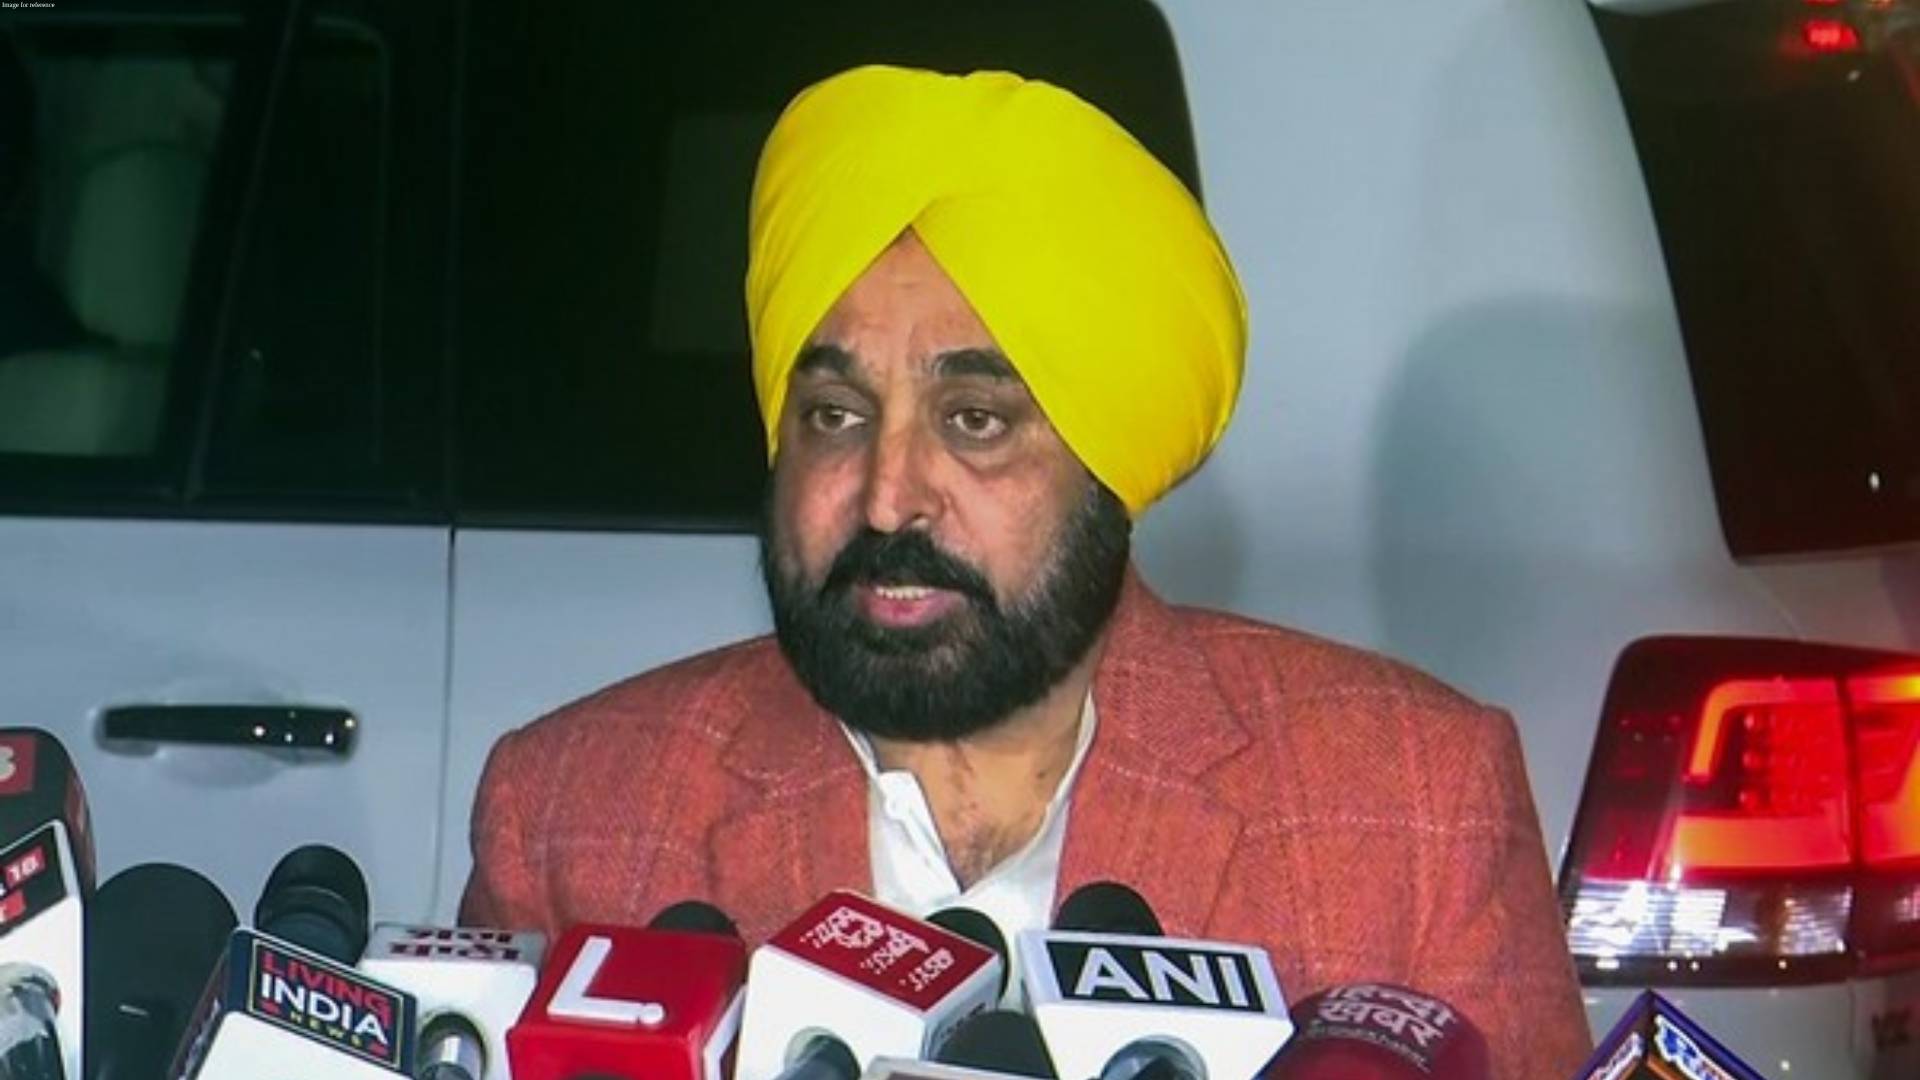 Punjab CM Bhagwant Mann announces Rs 1 crore aid for family of farmer killed in protest